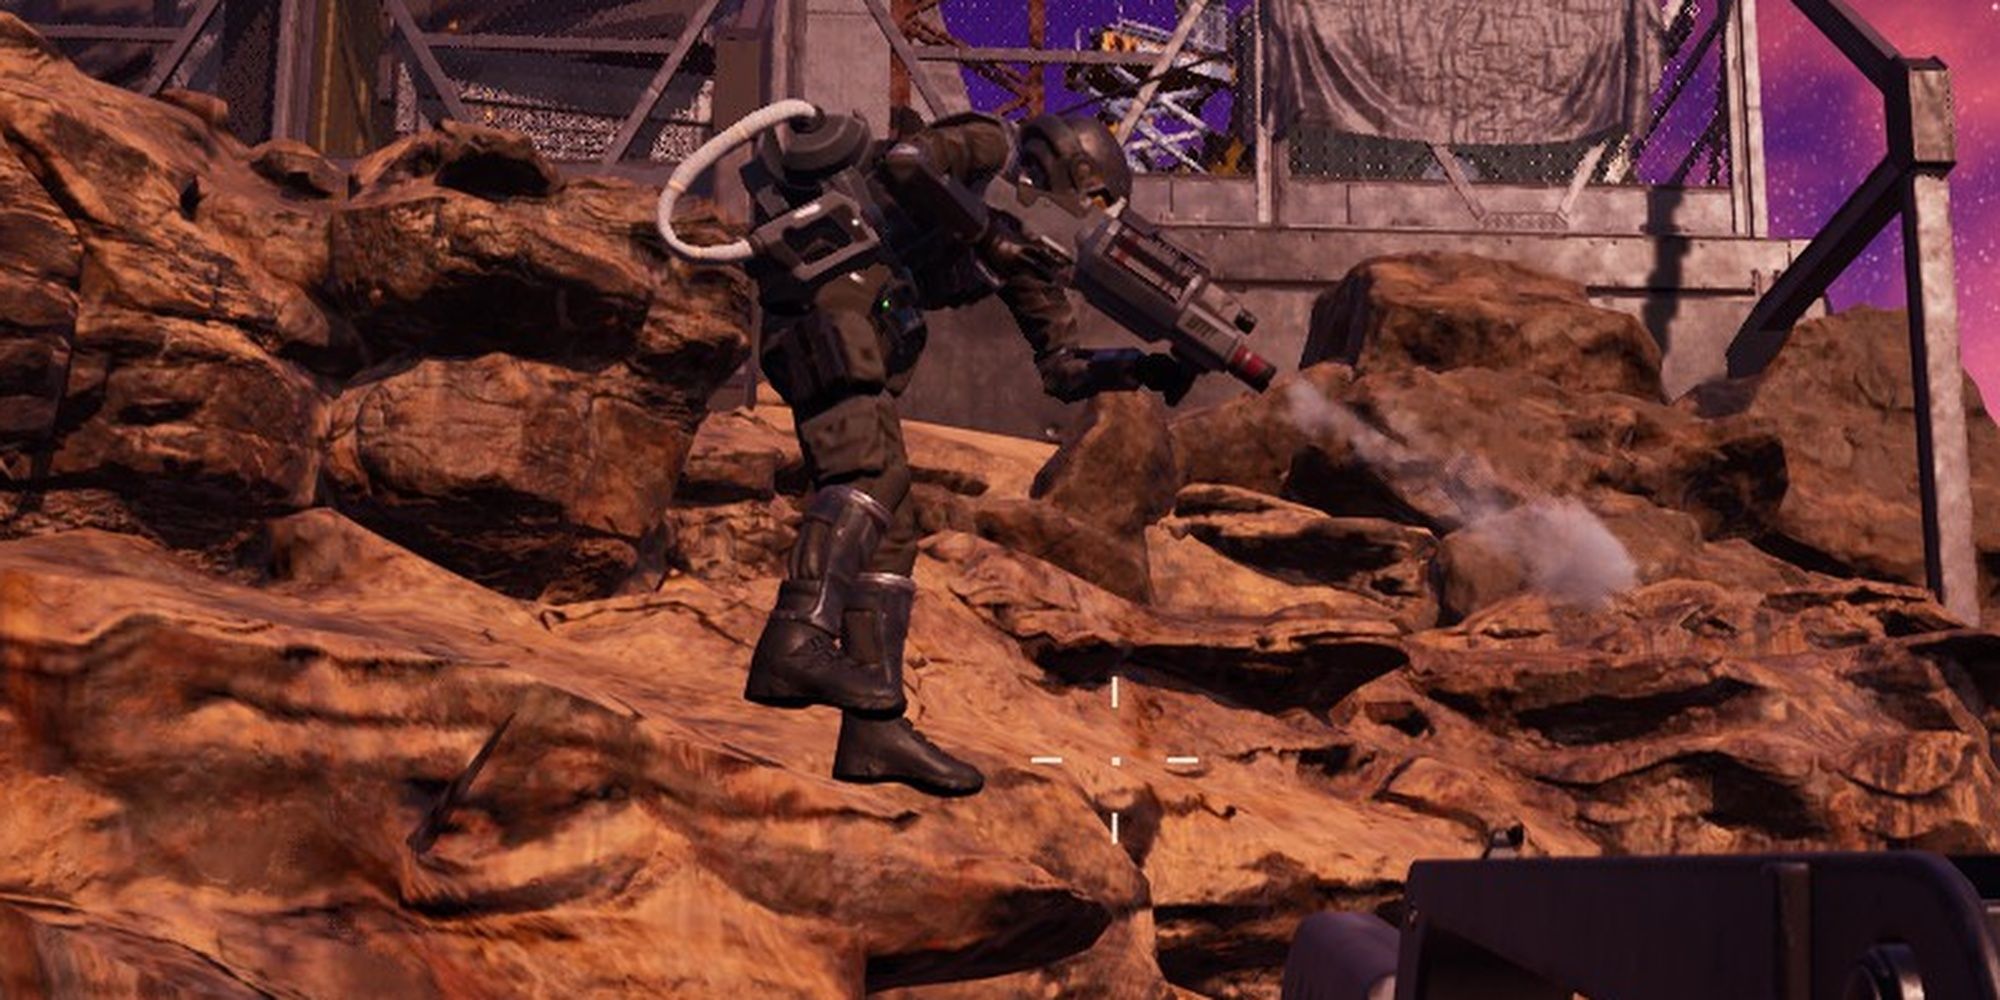 Starship Troopers: Extermination - An Operator Firing The Grenade Launcher From Another Perspective